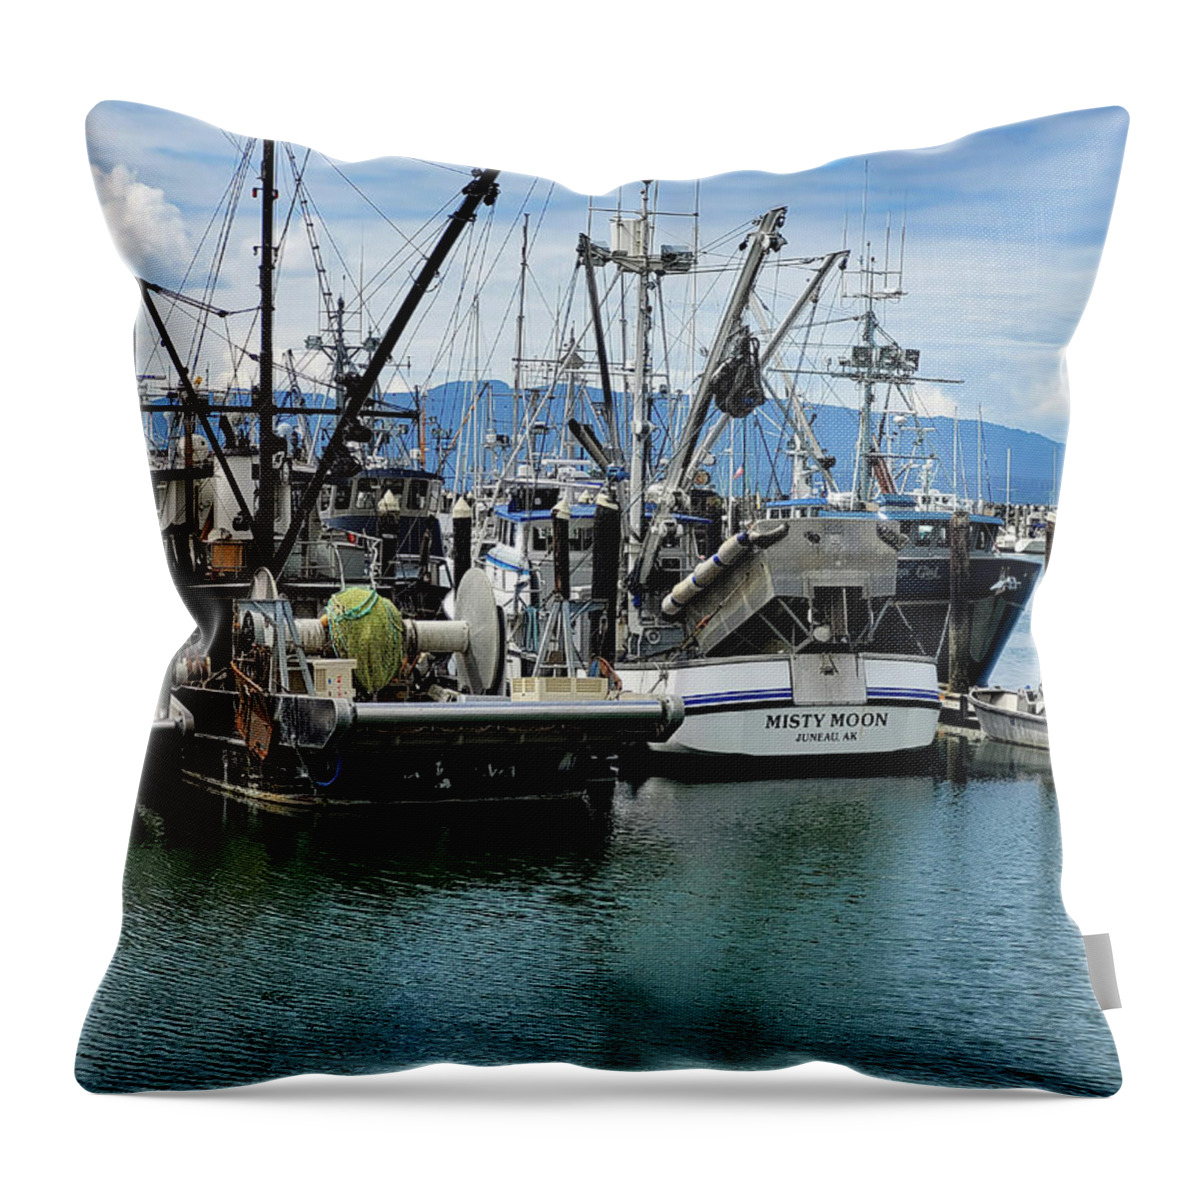 Fishing Vessel Misty Moon By Norma Appleton Throw Pillow featuring the photograph Fishing Vessel Misty Moon #2 by Norma Appleton